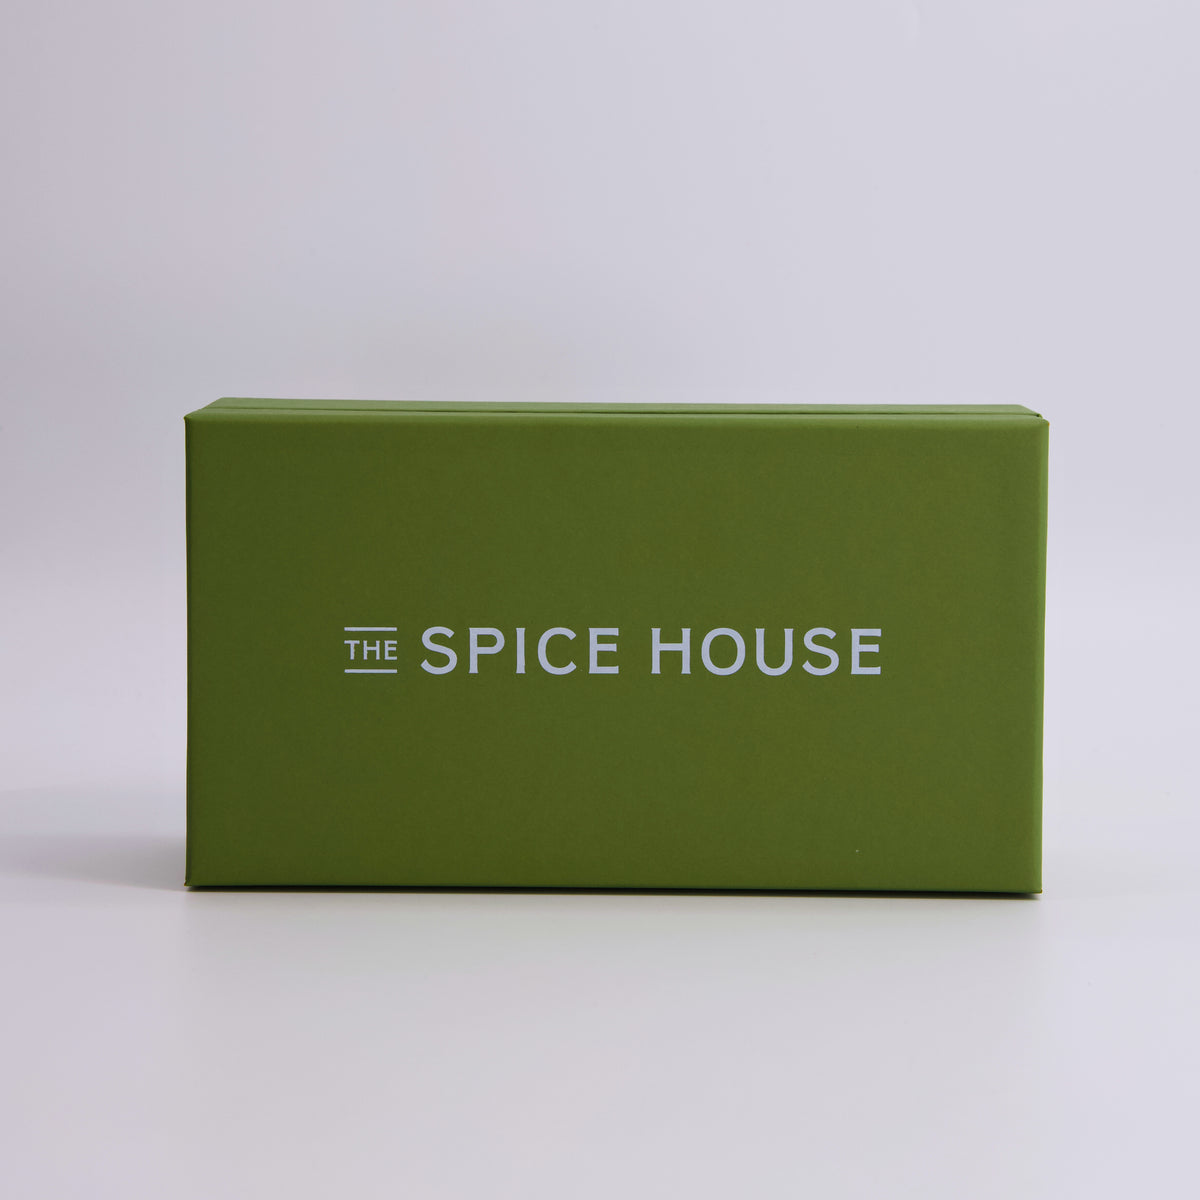 Mediterranean Spices Gift Box Collection, Spice Hampers